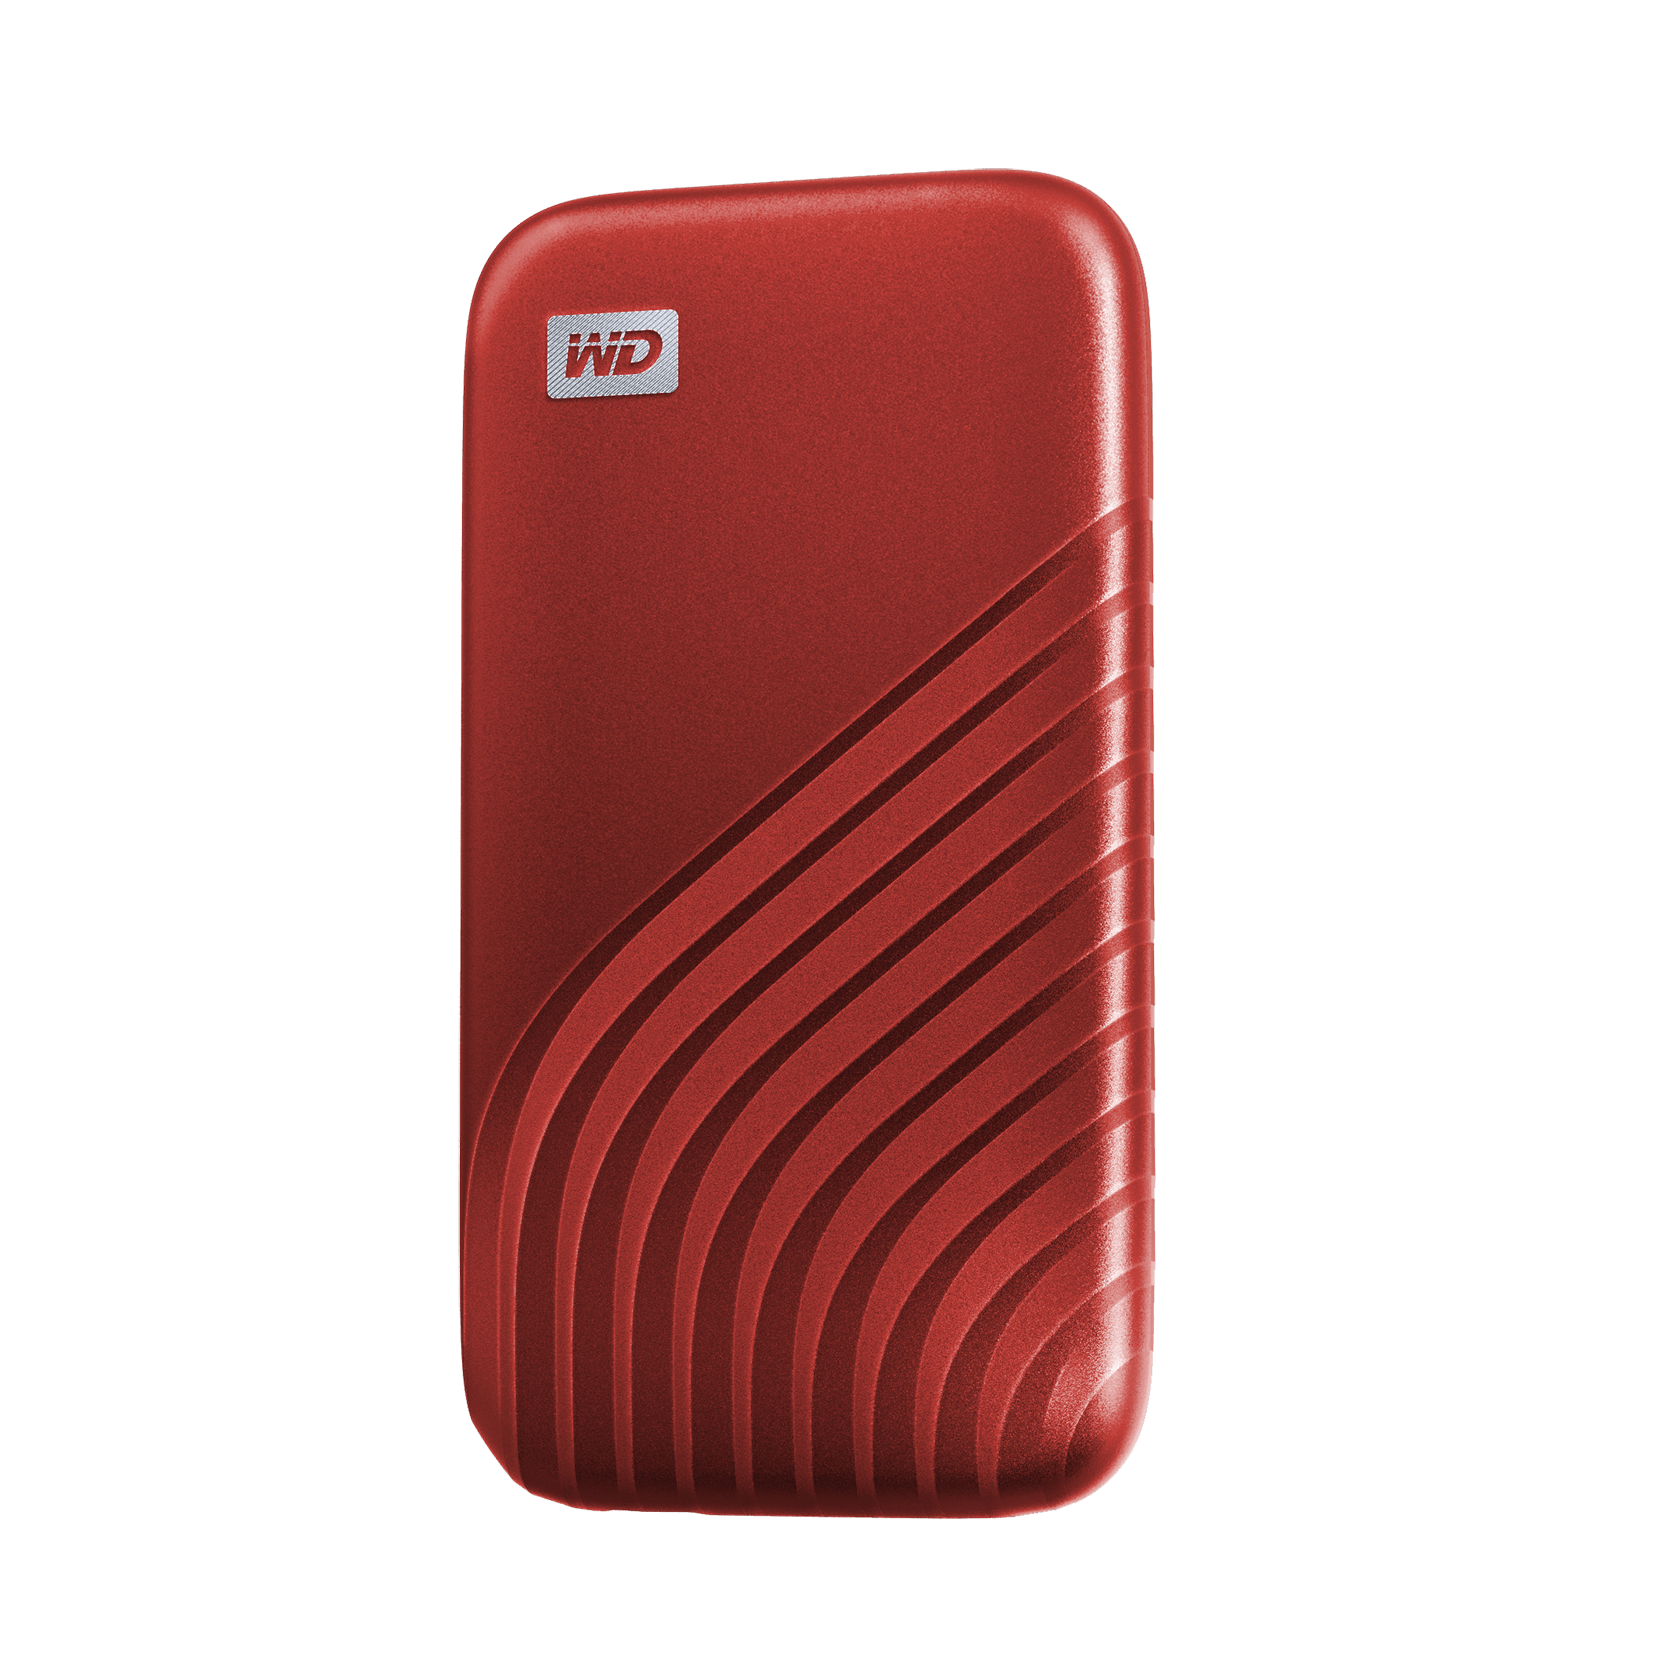 WD 1TB My Passport SSD, Portable External Solid State Drive, Red - WDBAGF0010BRD-WESN - image 3 of 8